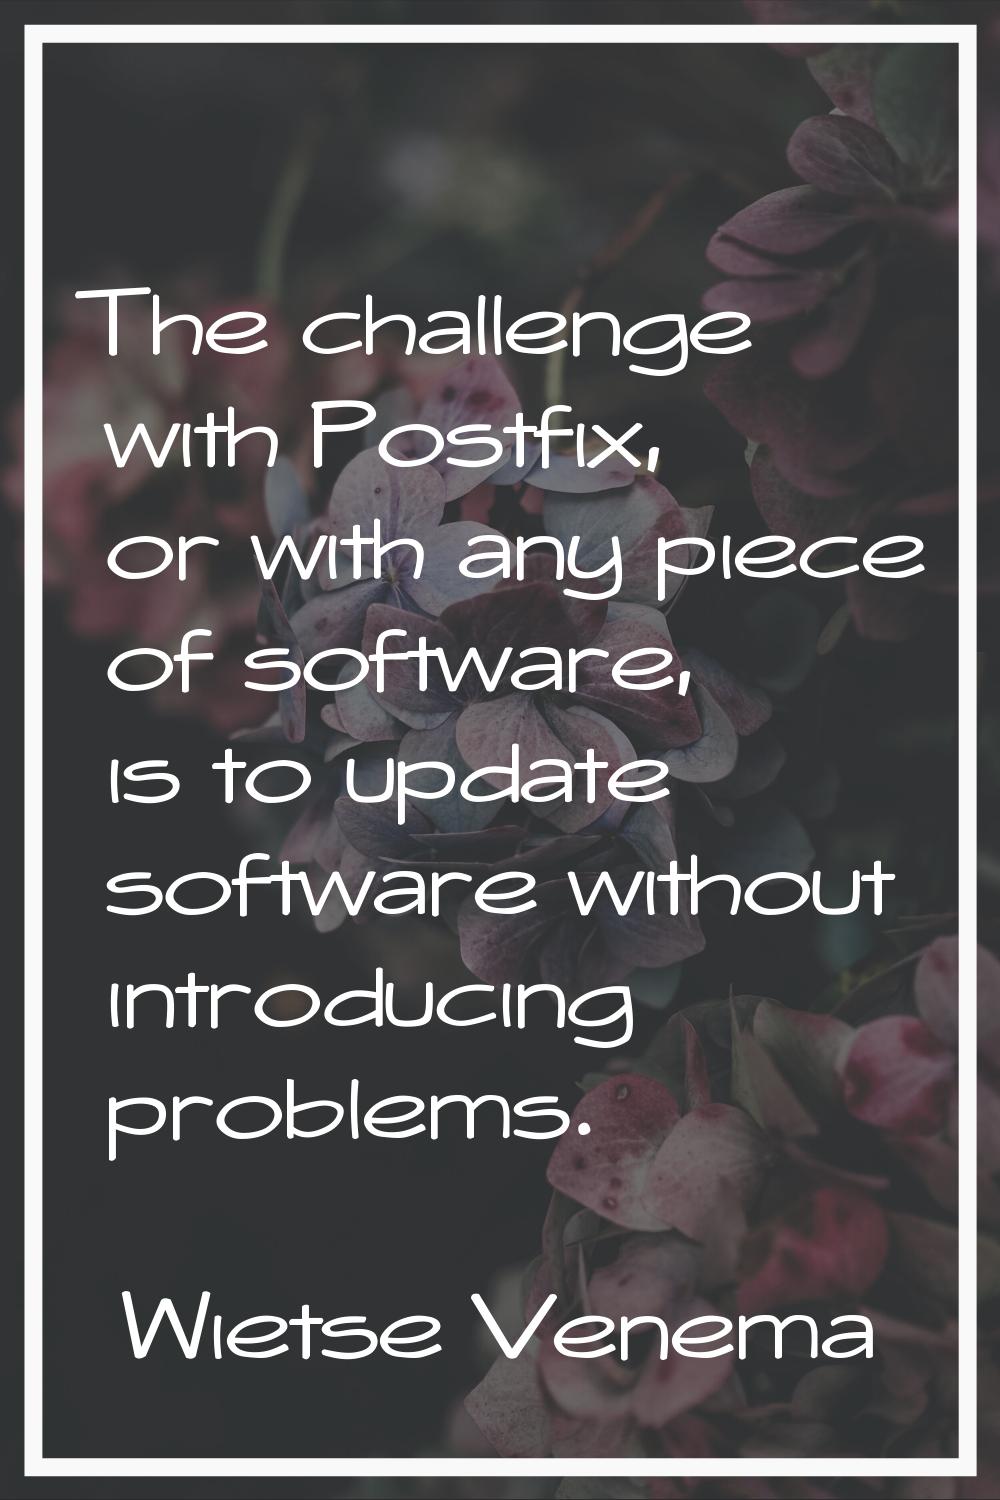 The challenge with Postfix, or with any piece of software, is to update software without introducin